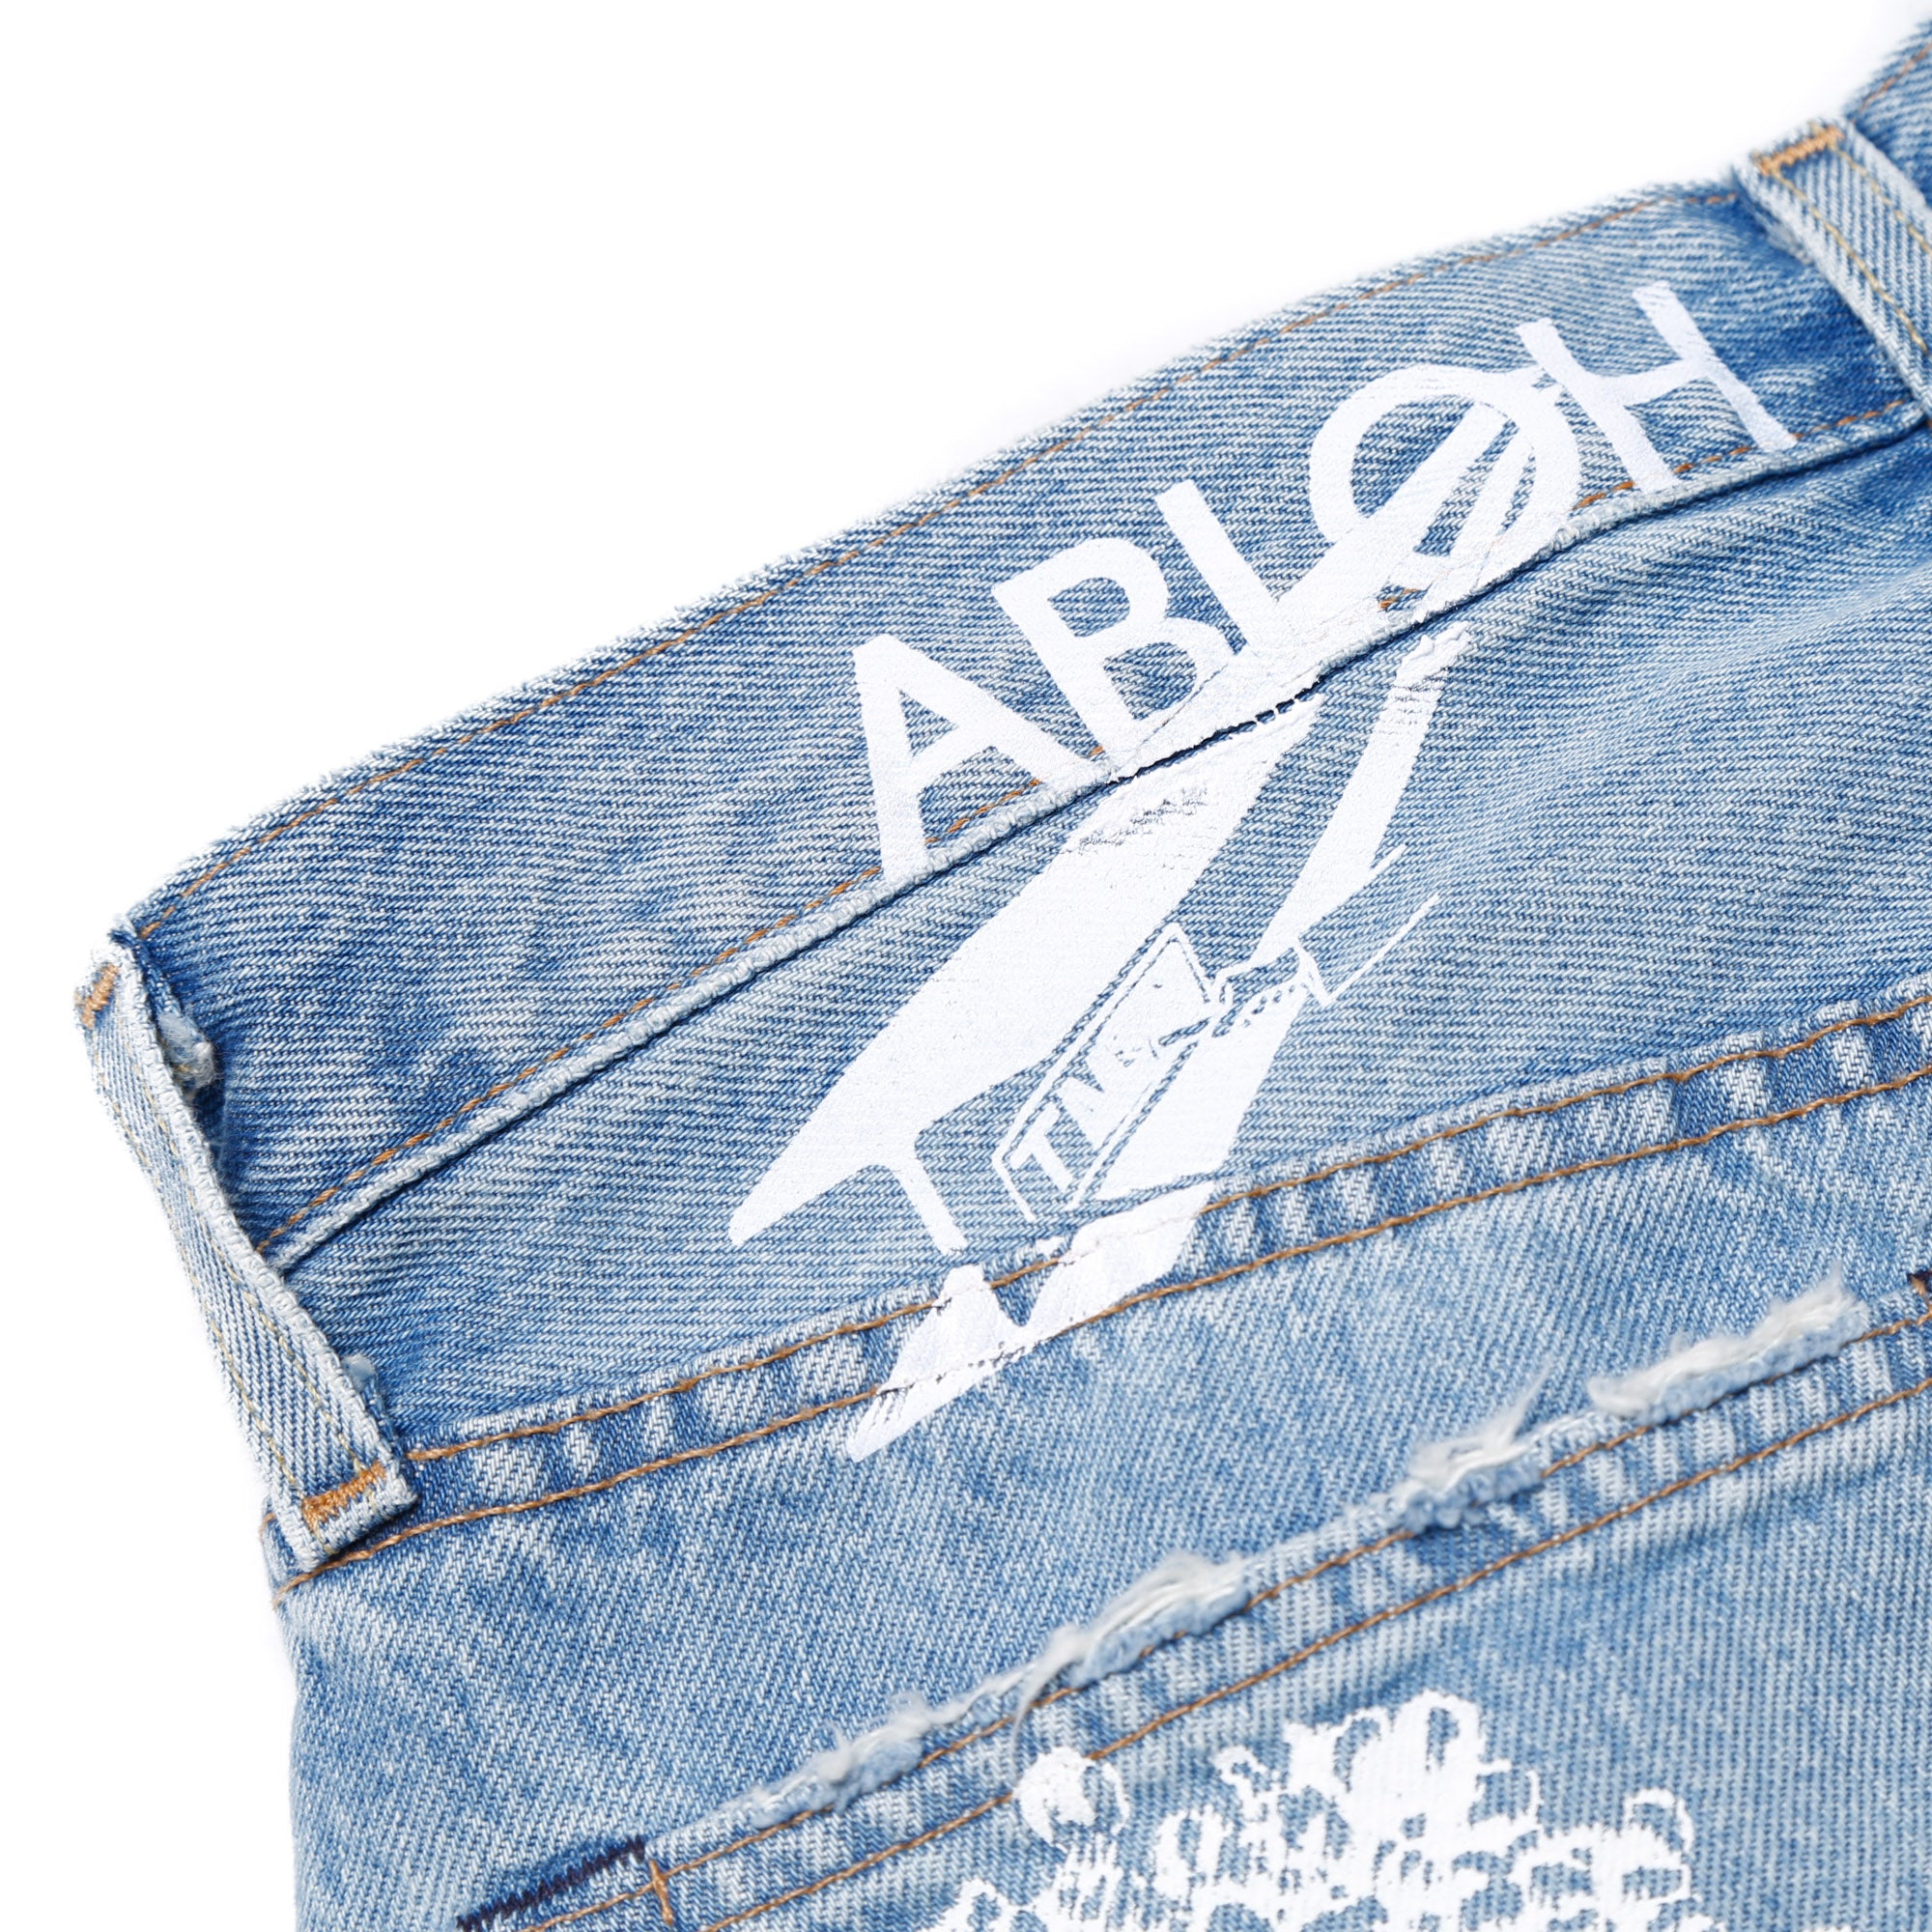 DENIM TEARS x VIRGIL ABLOH “MESSAGE IN A TEAR” PRINTED JEANS – Canary Yellow